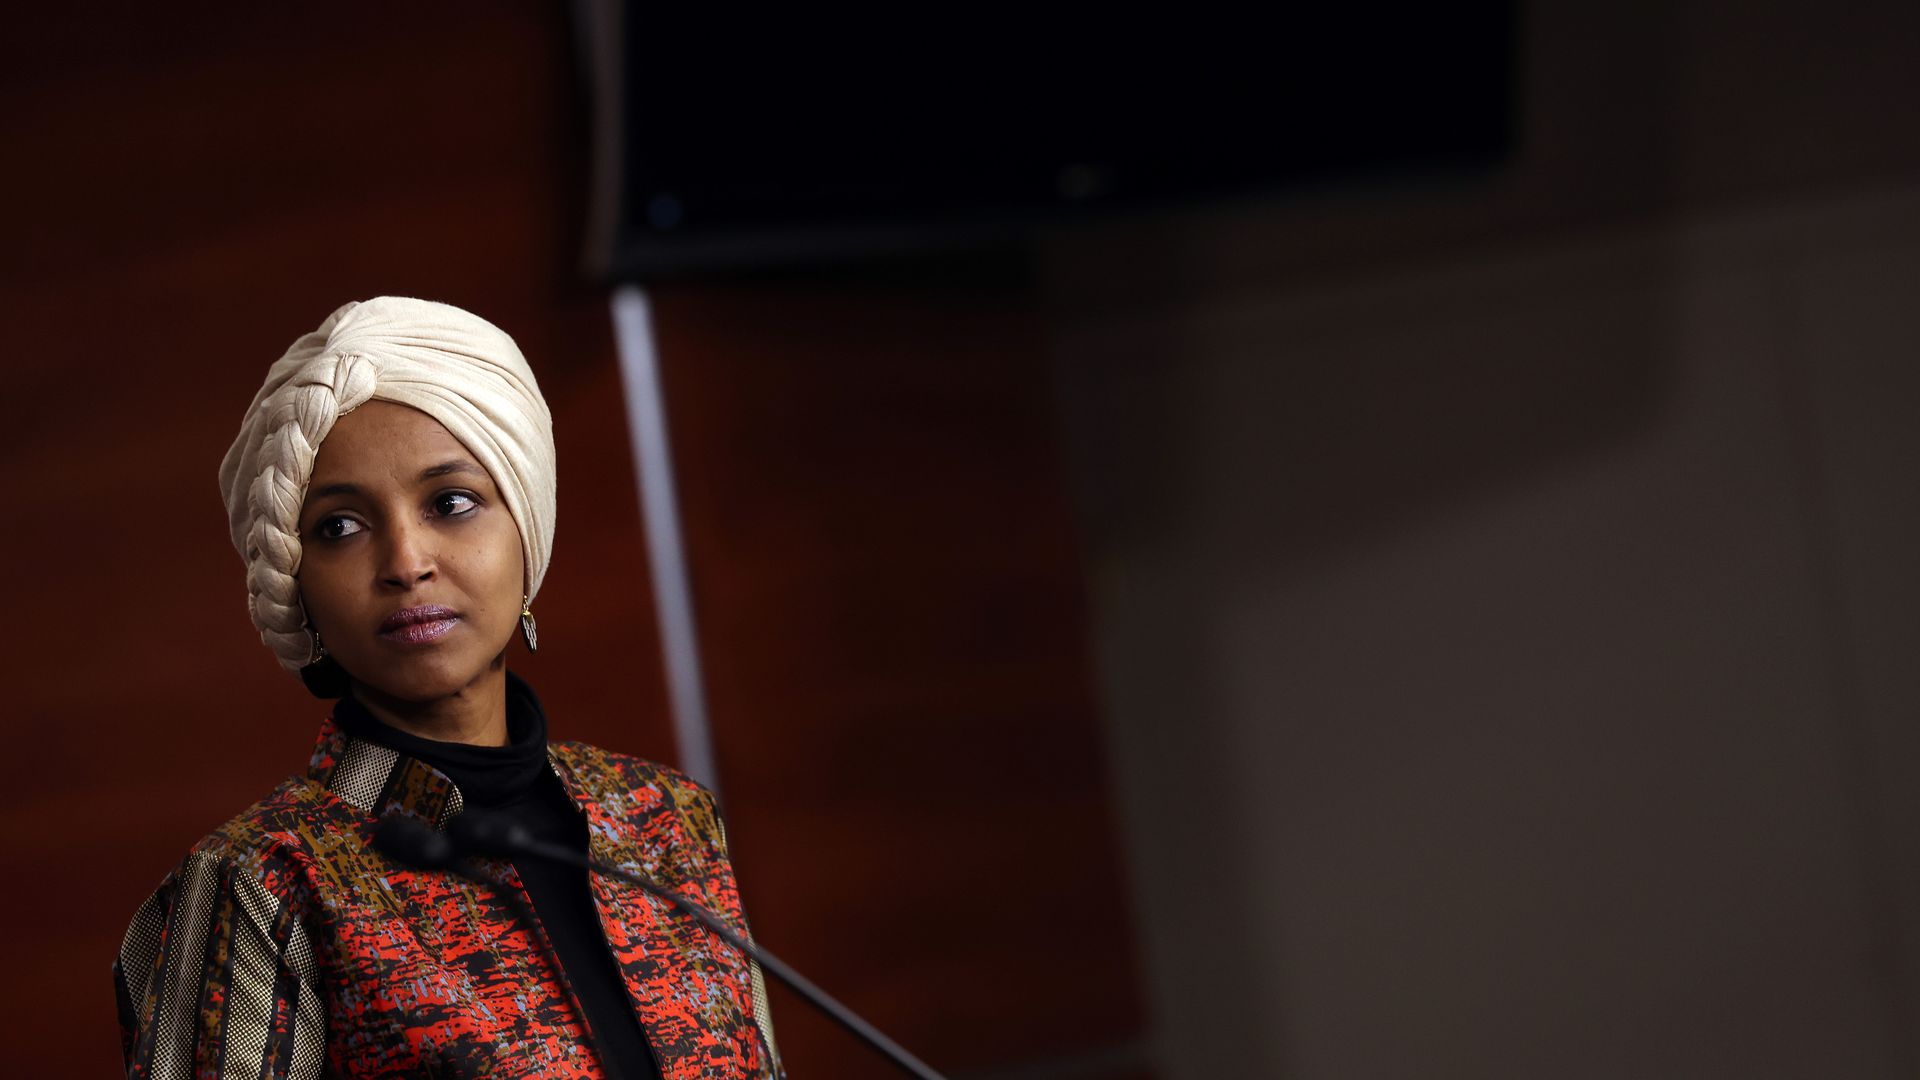 Rep. Ilhan Omar, wearing a white headscarf and a red, white, black and gold jacket over a blue sweater, speaks to reporters at a House TV studio.